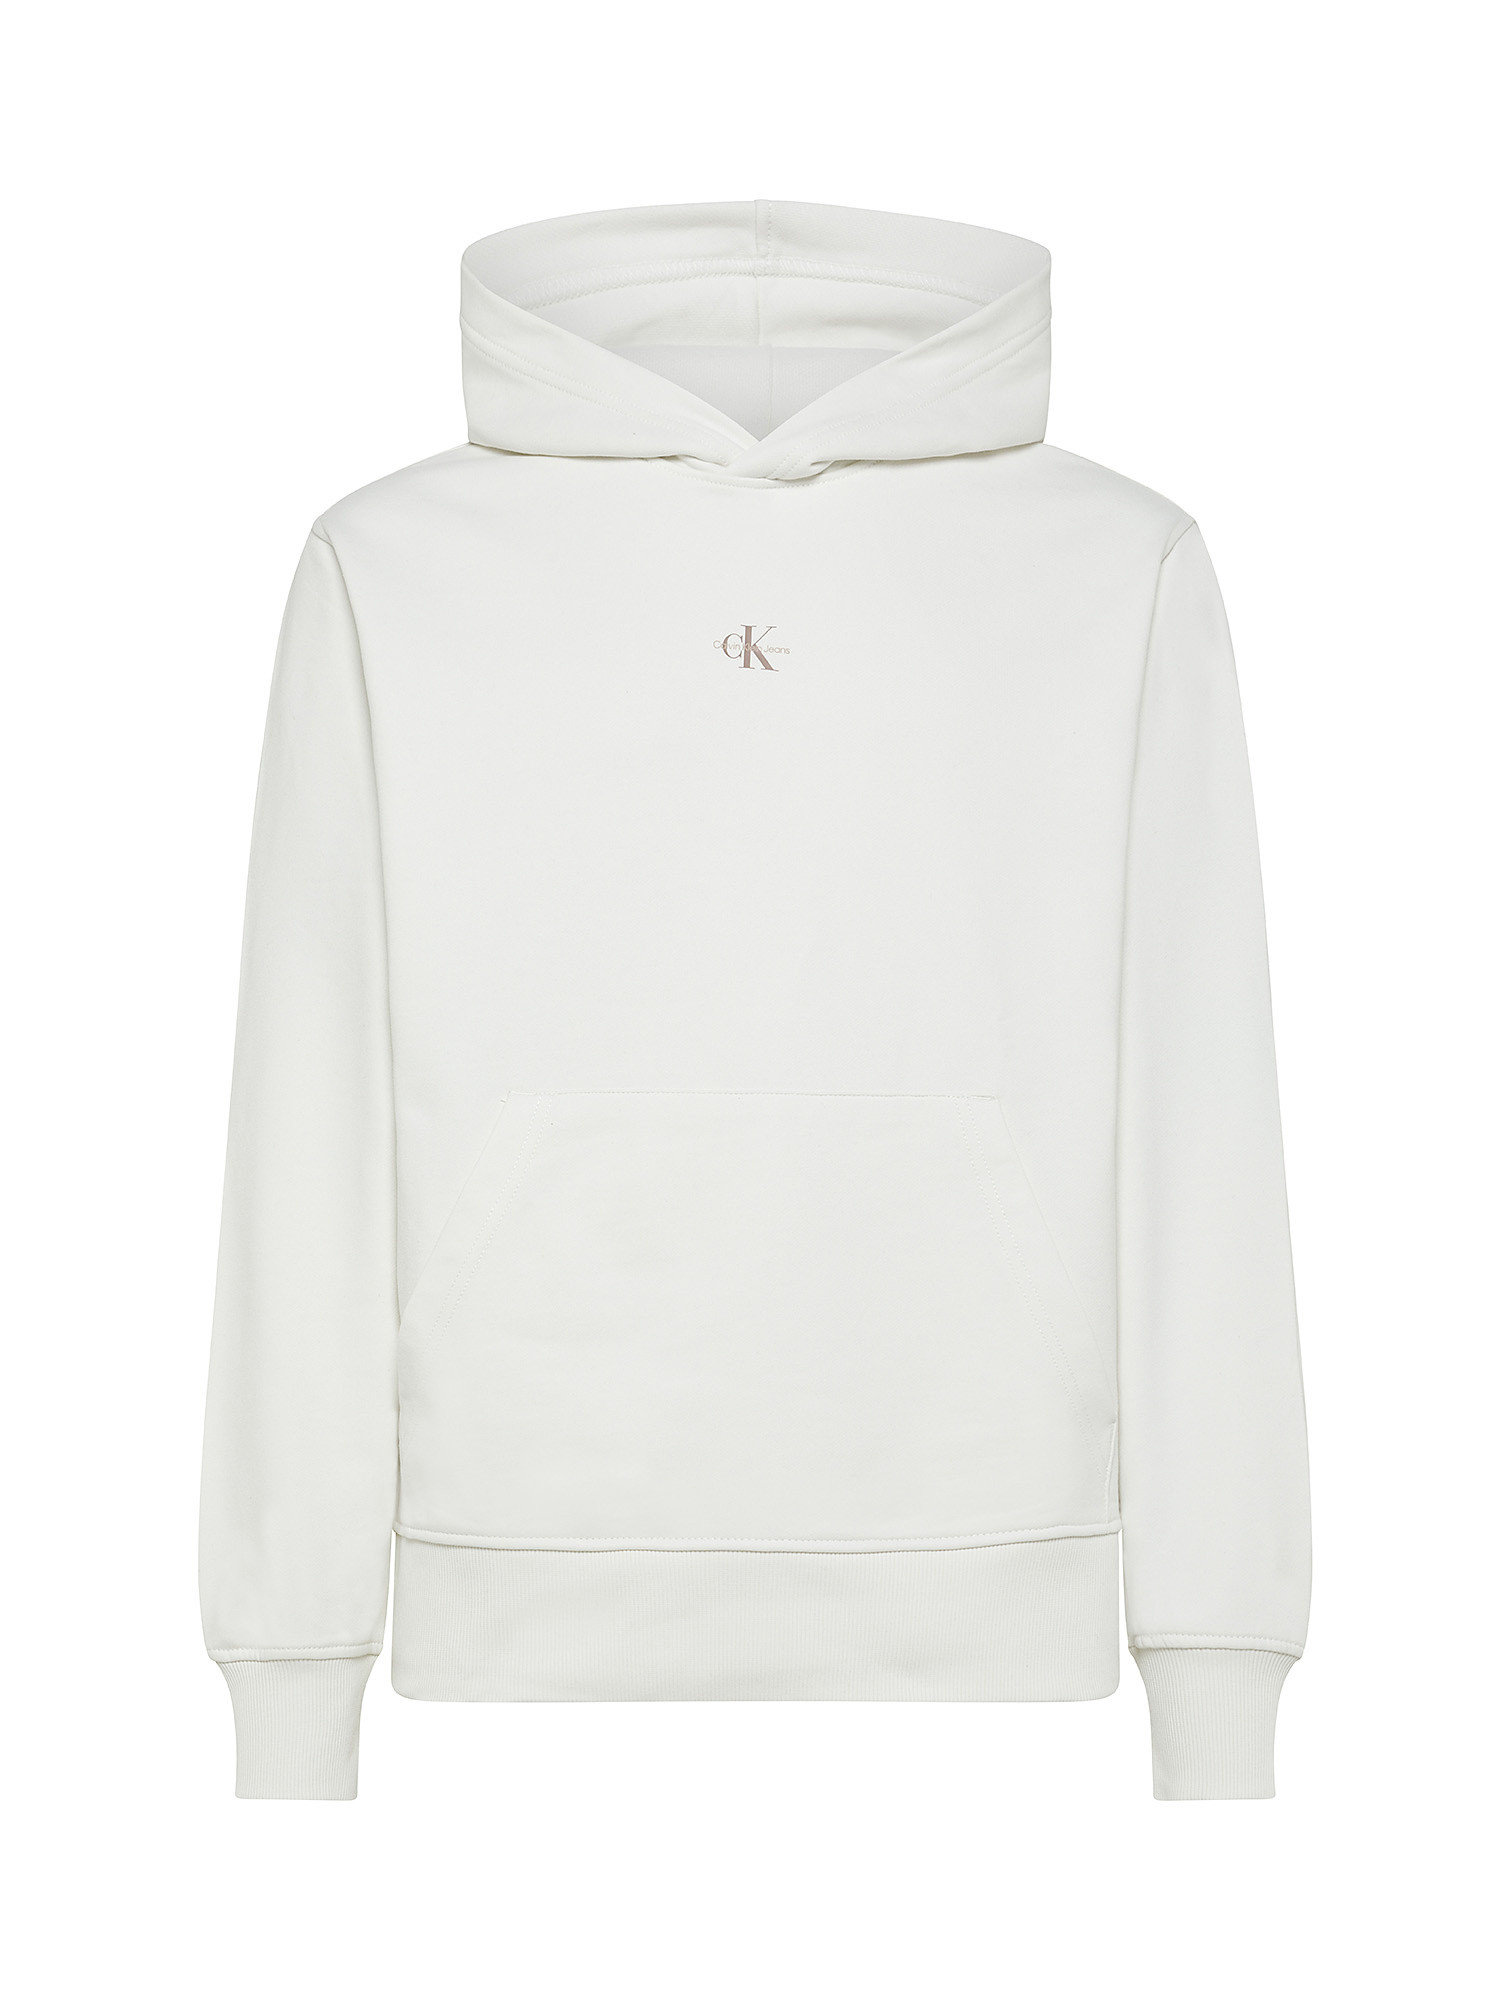 Calvin Klein Jeans -  Cotton hooded sweatshirt with logo, White, large image number 0